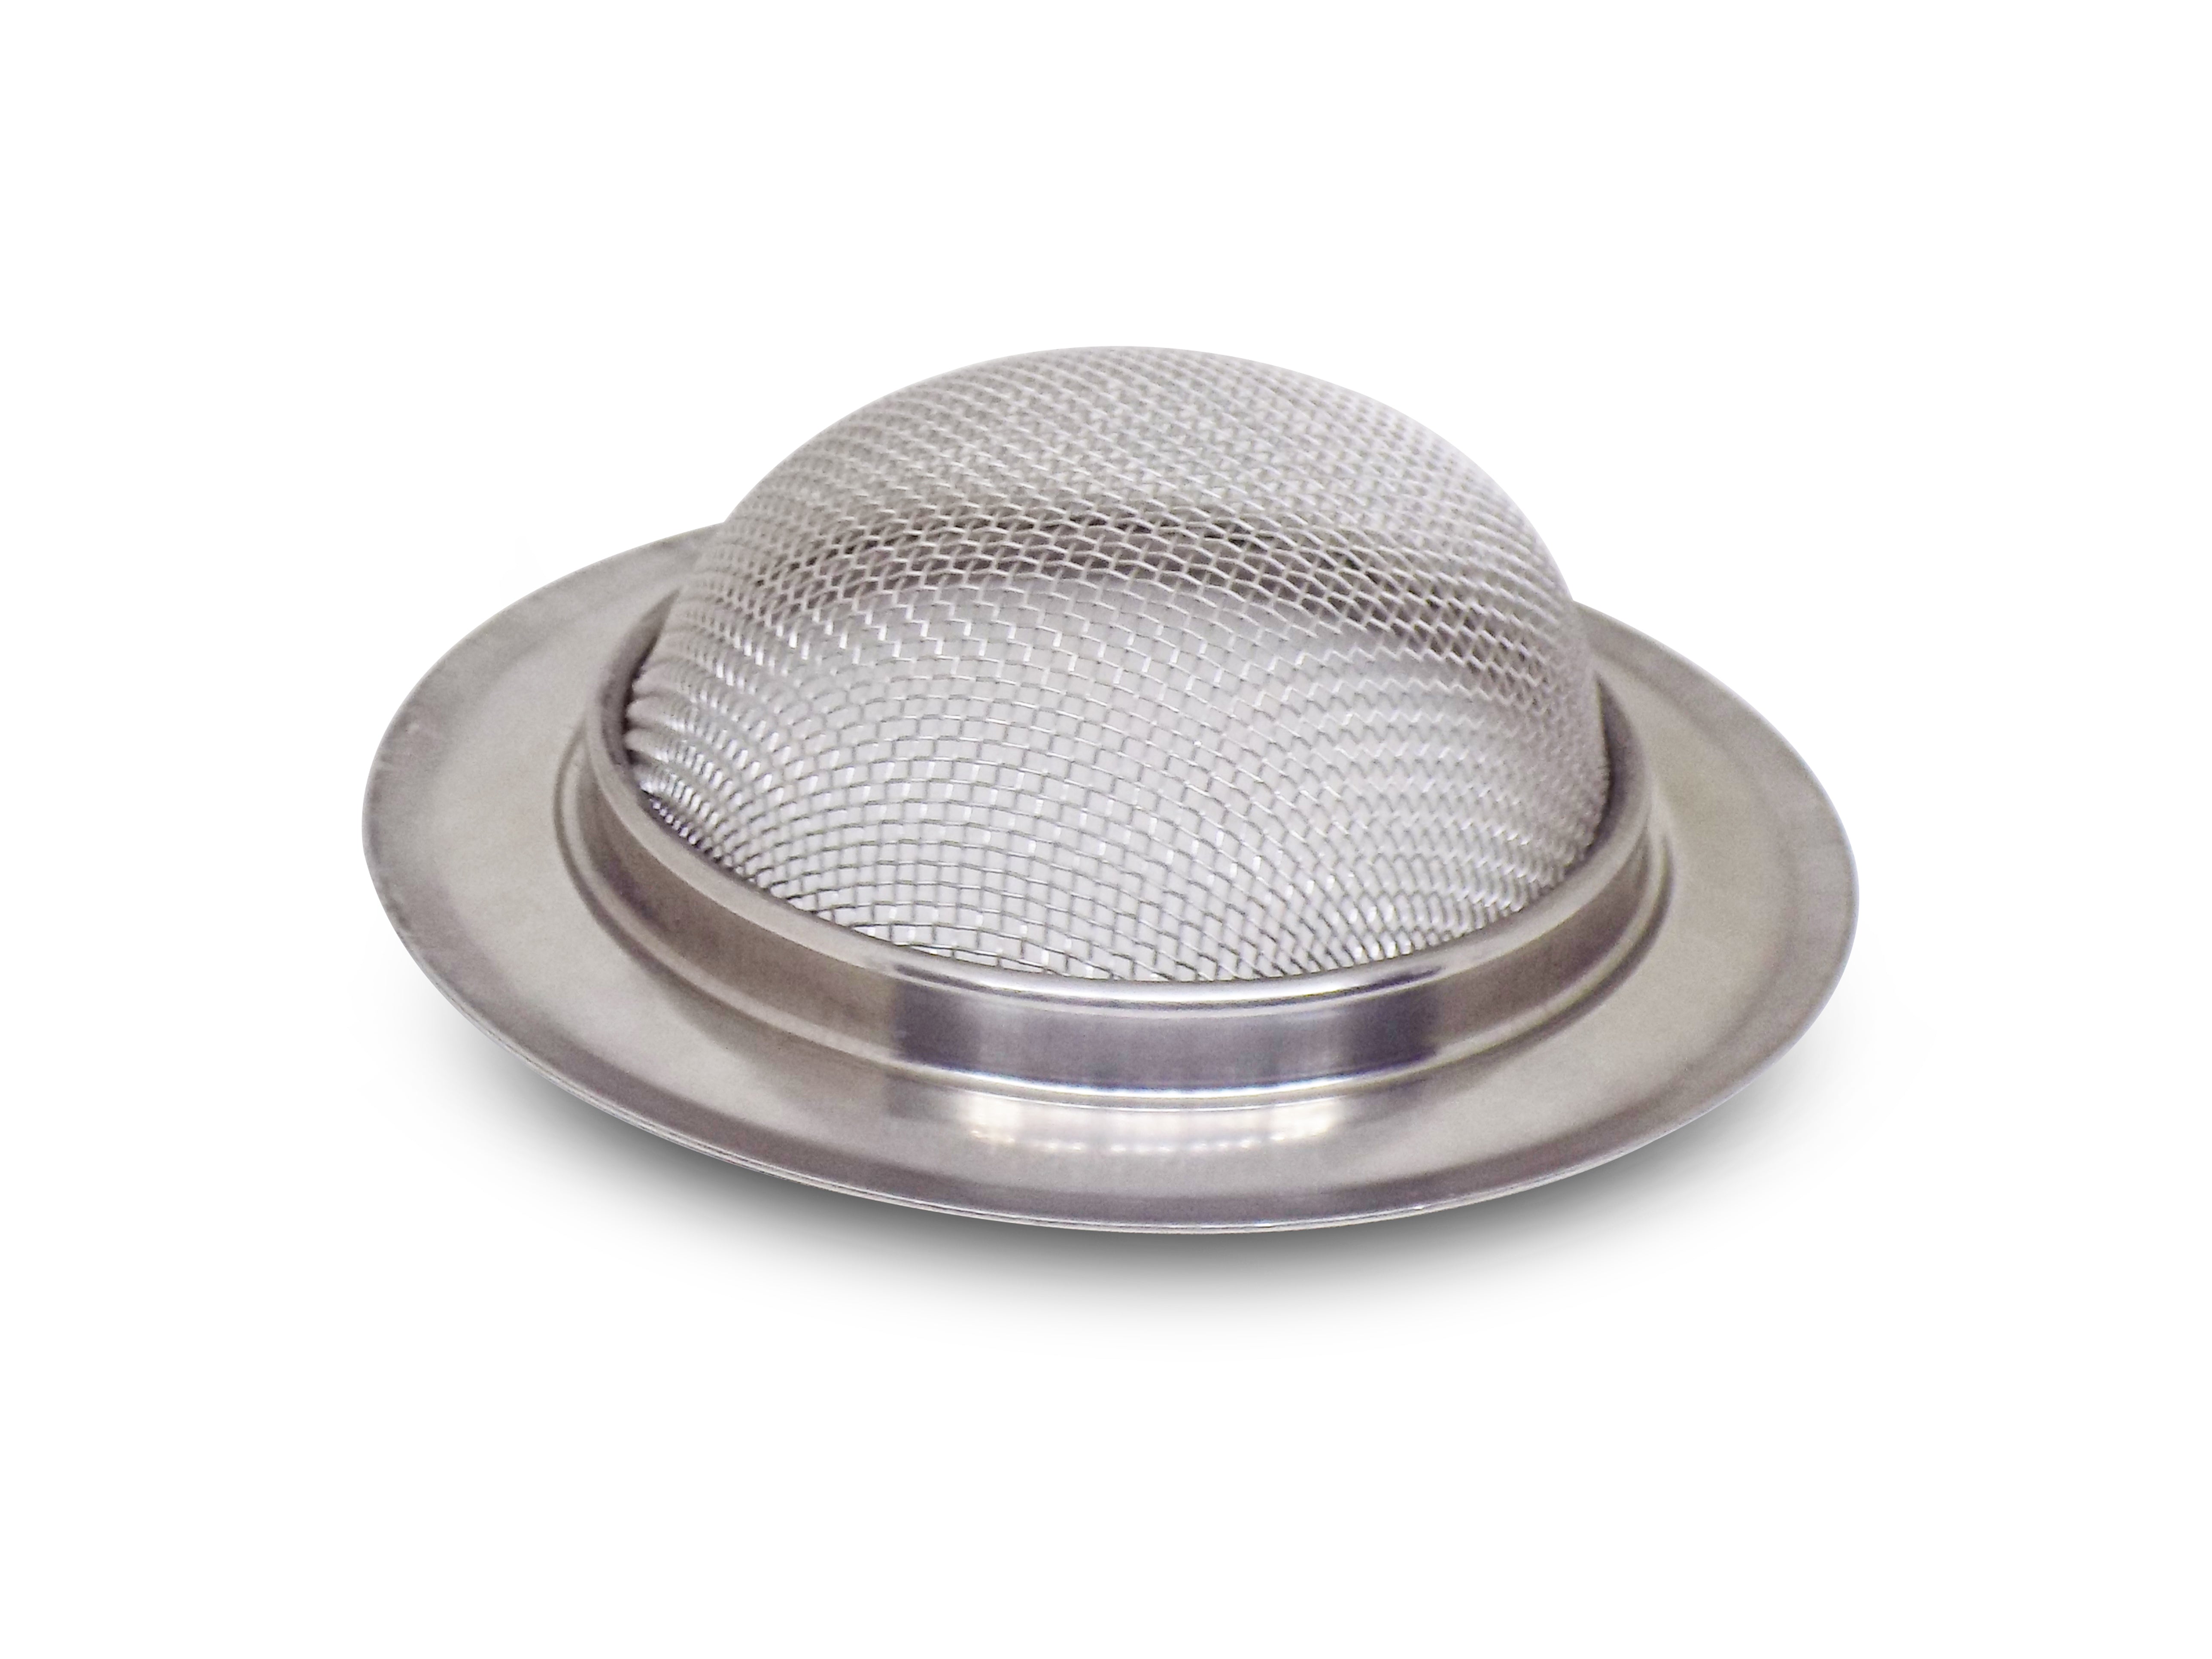 0790 Large Stainless Steel Sink/Wash Basin Drain Strainer - China, 0.066 kgs